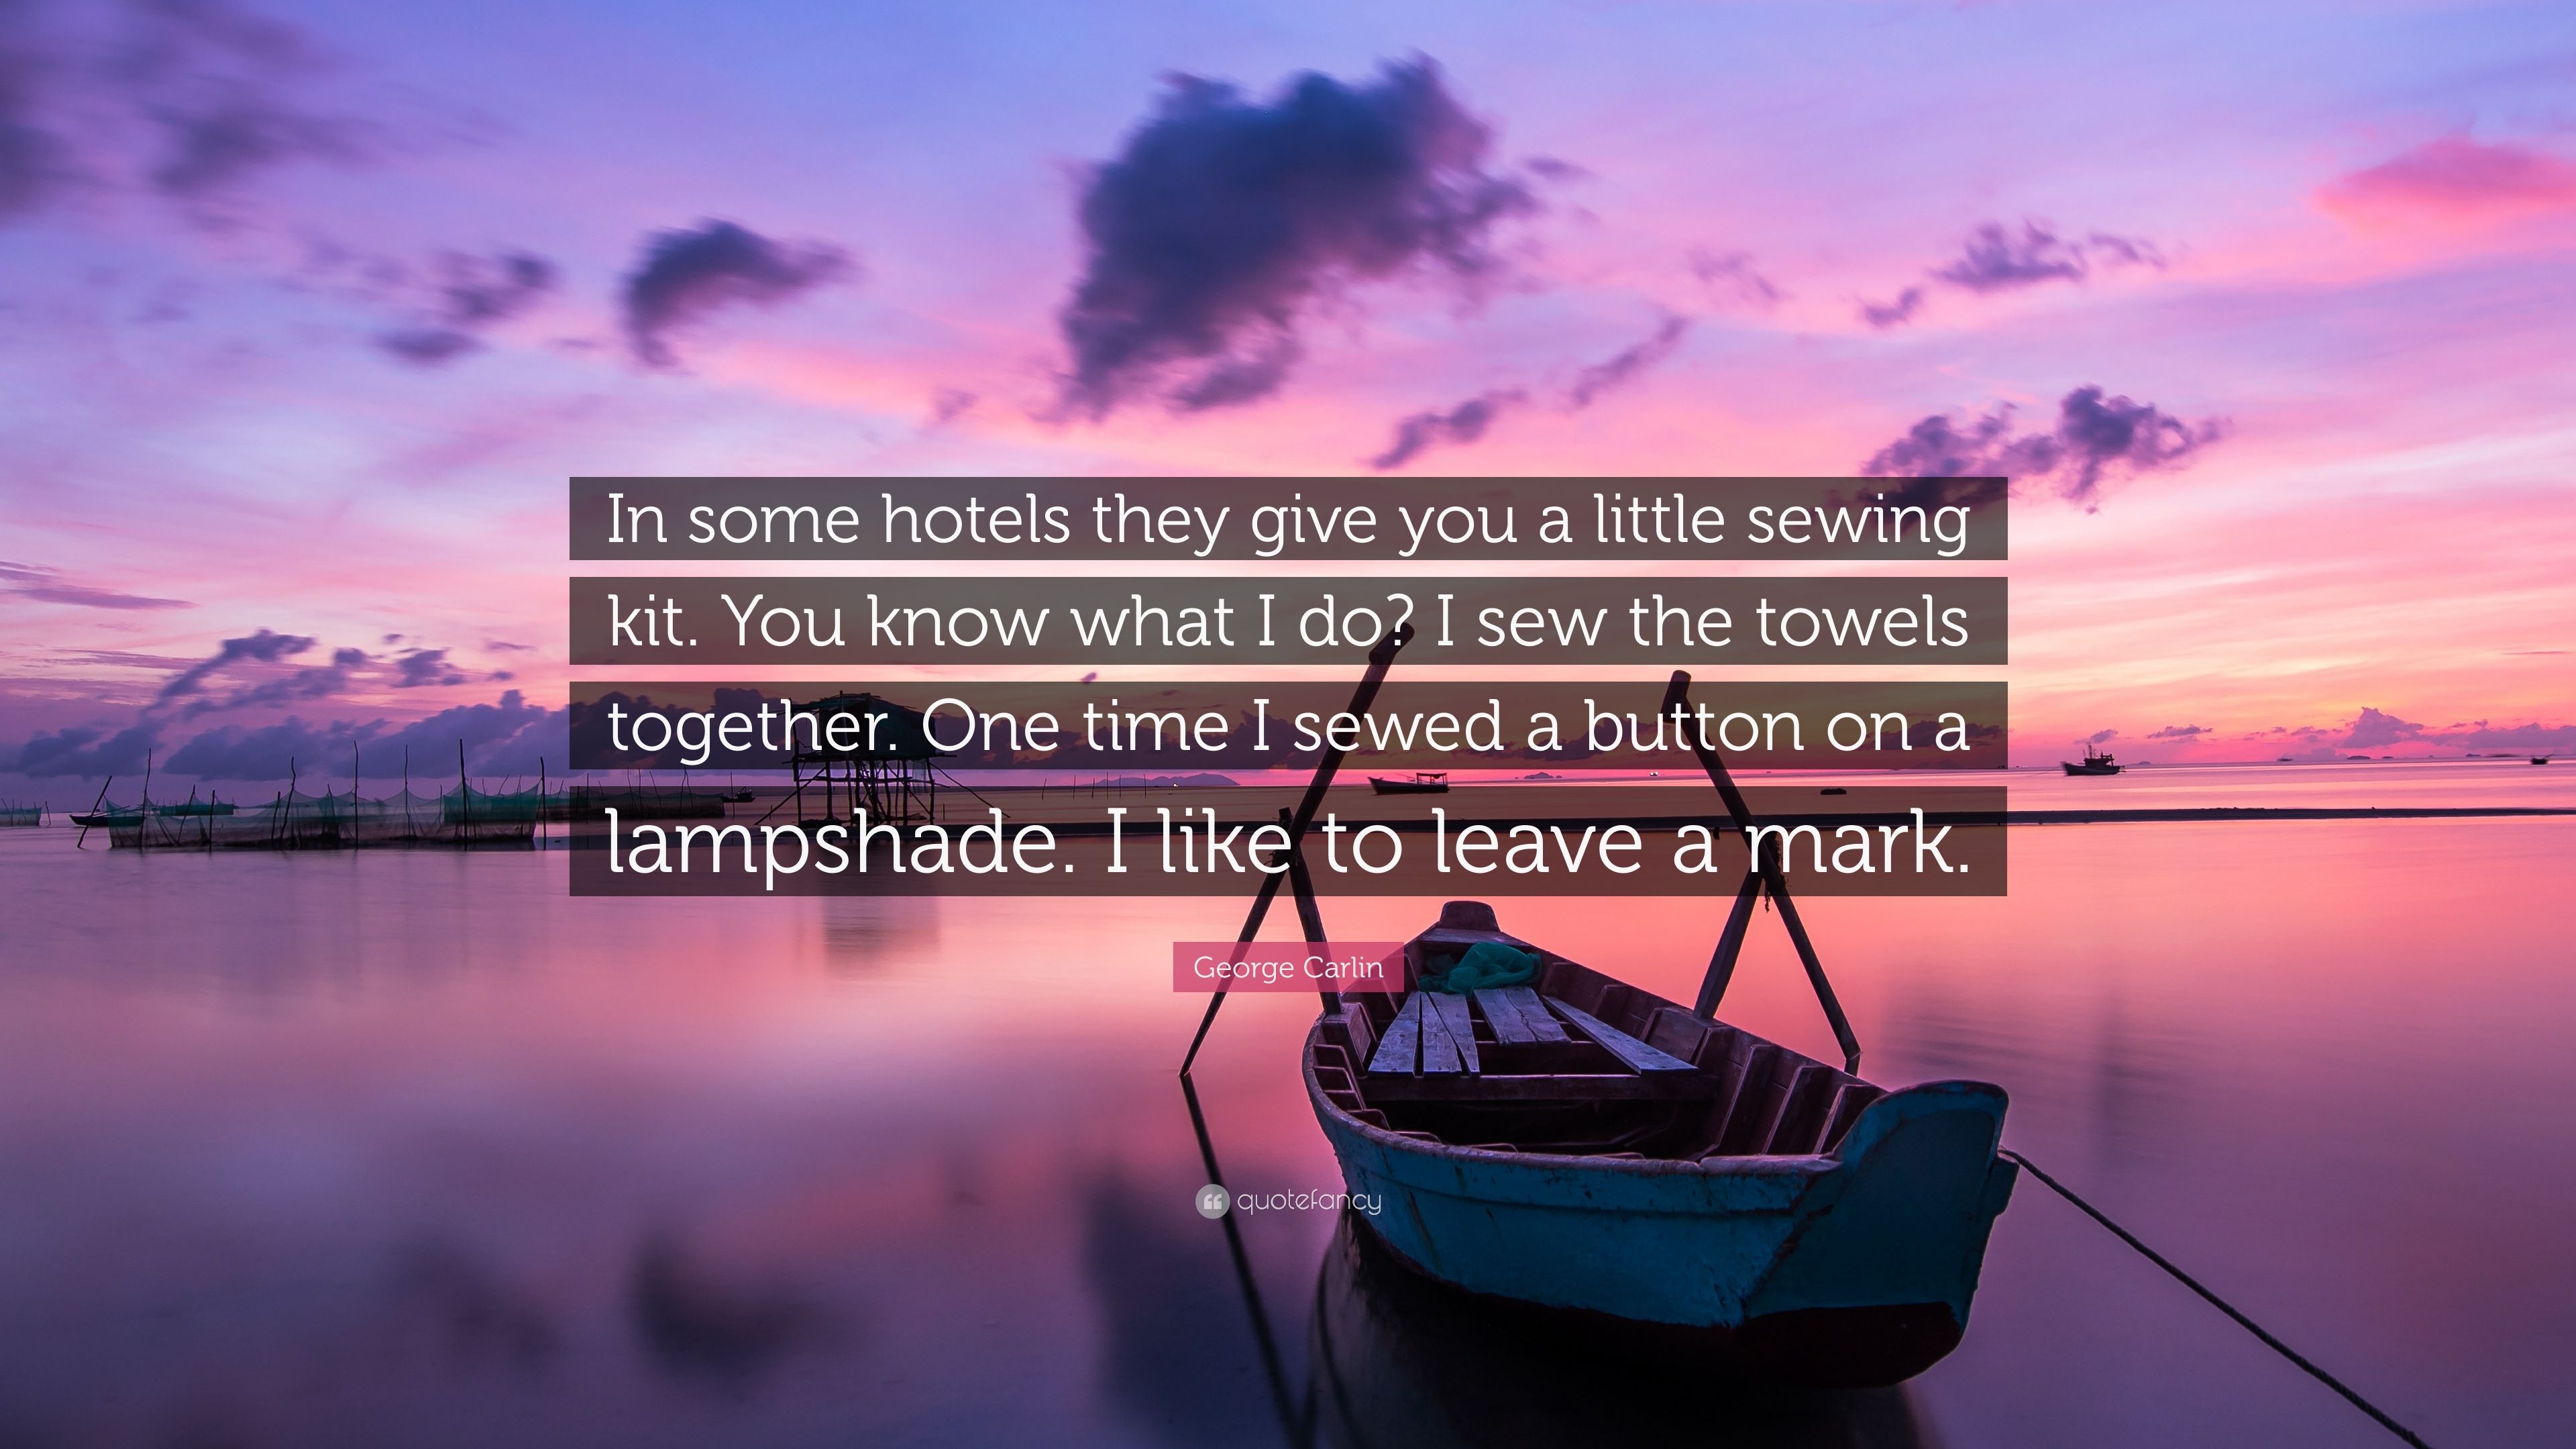 George Carlin Quote: “In some hotels they give you a little sewing kit. You know what I do? I sew the towels together. One time I sewed a butt.” (7 wallpaper)